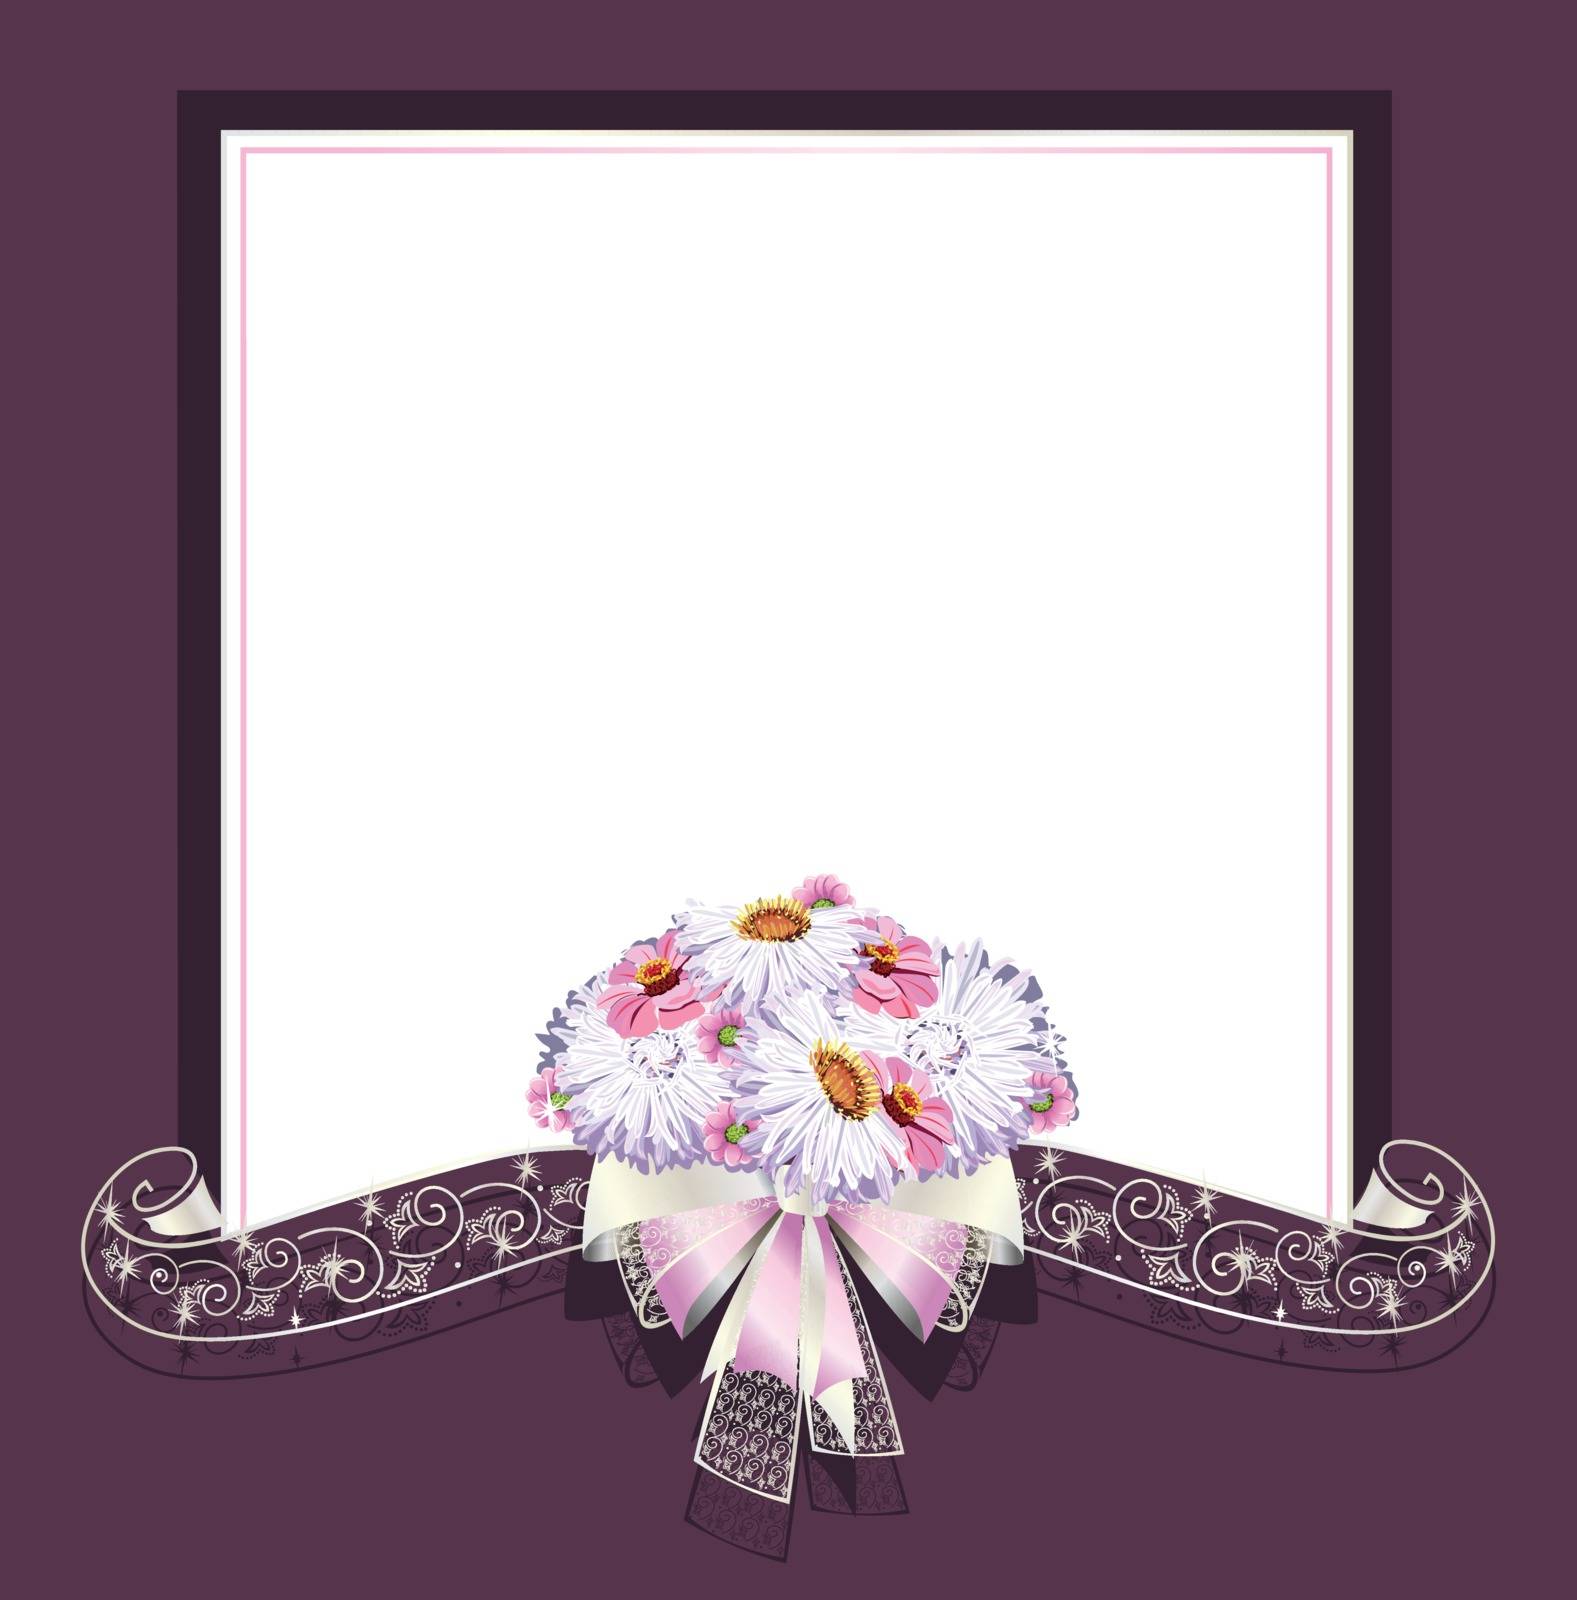 Wedding frame with openwork and satin ribbons